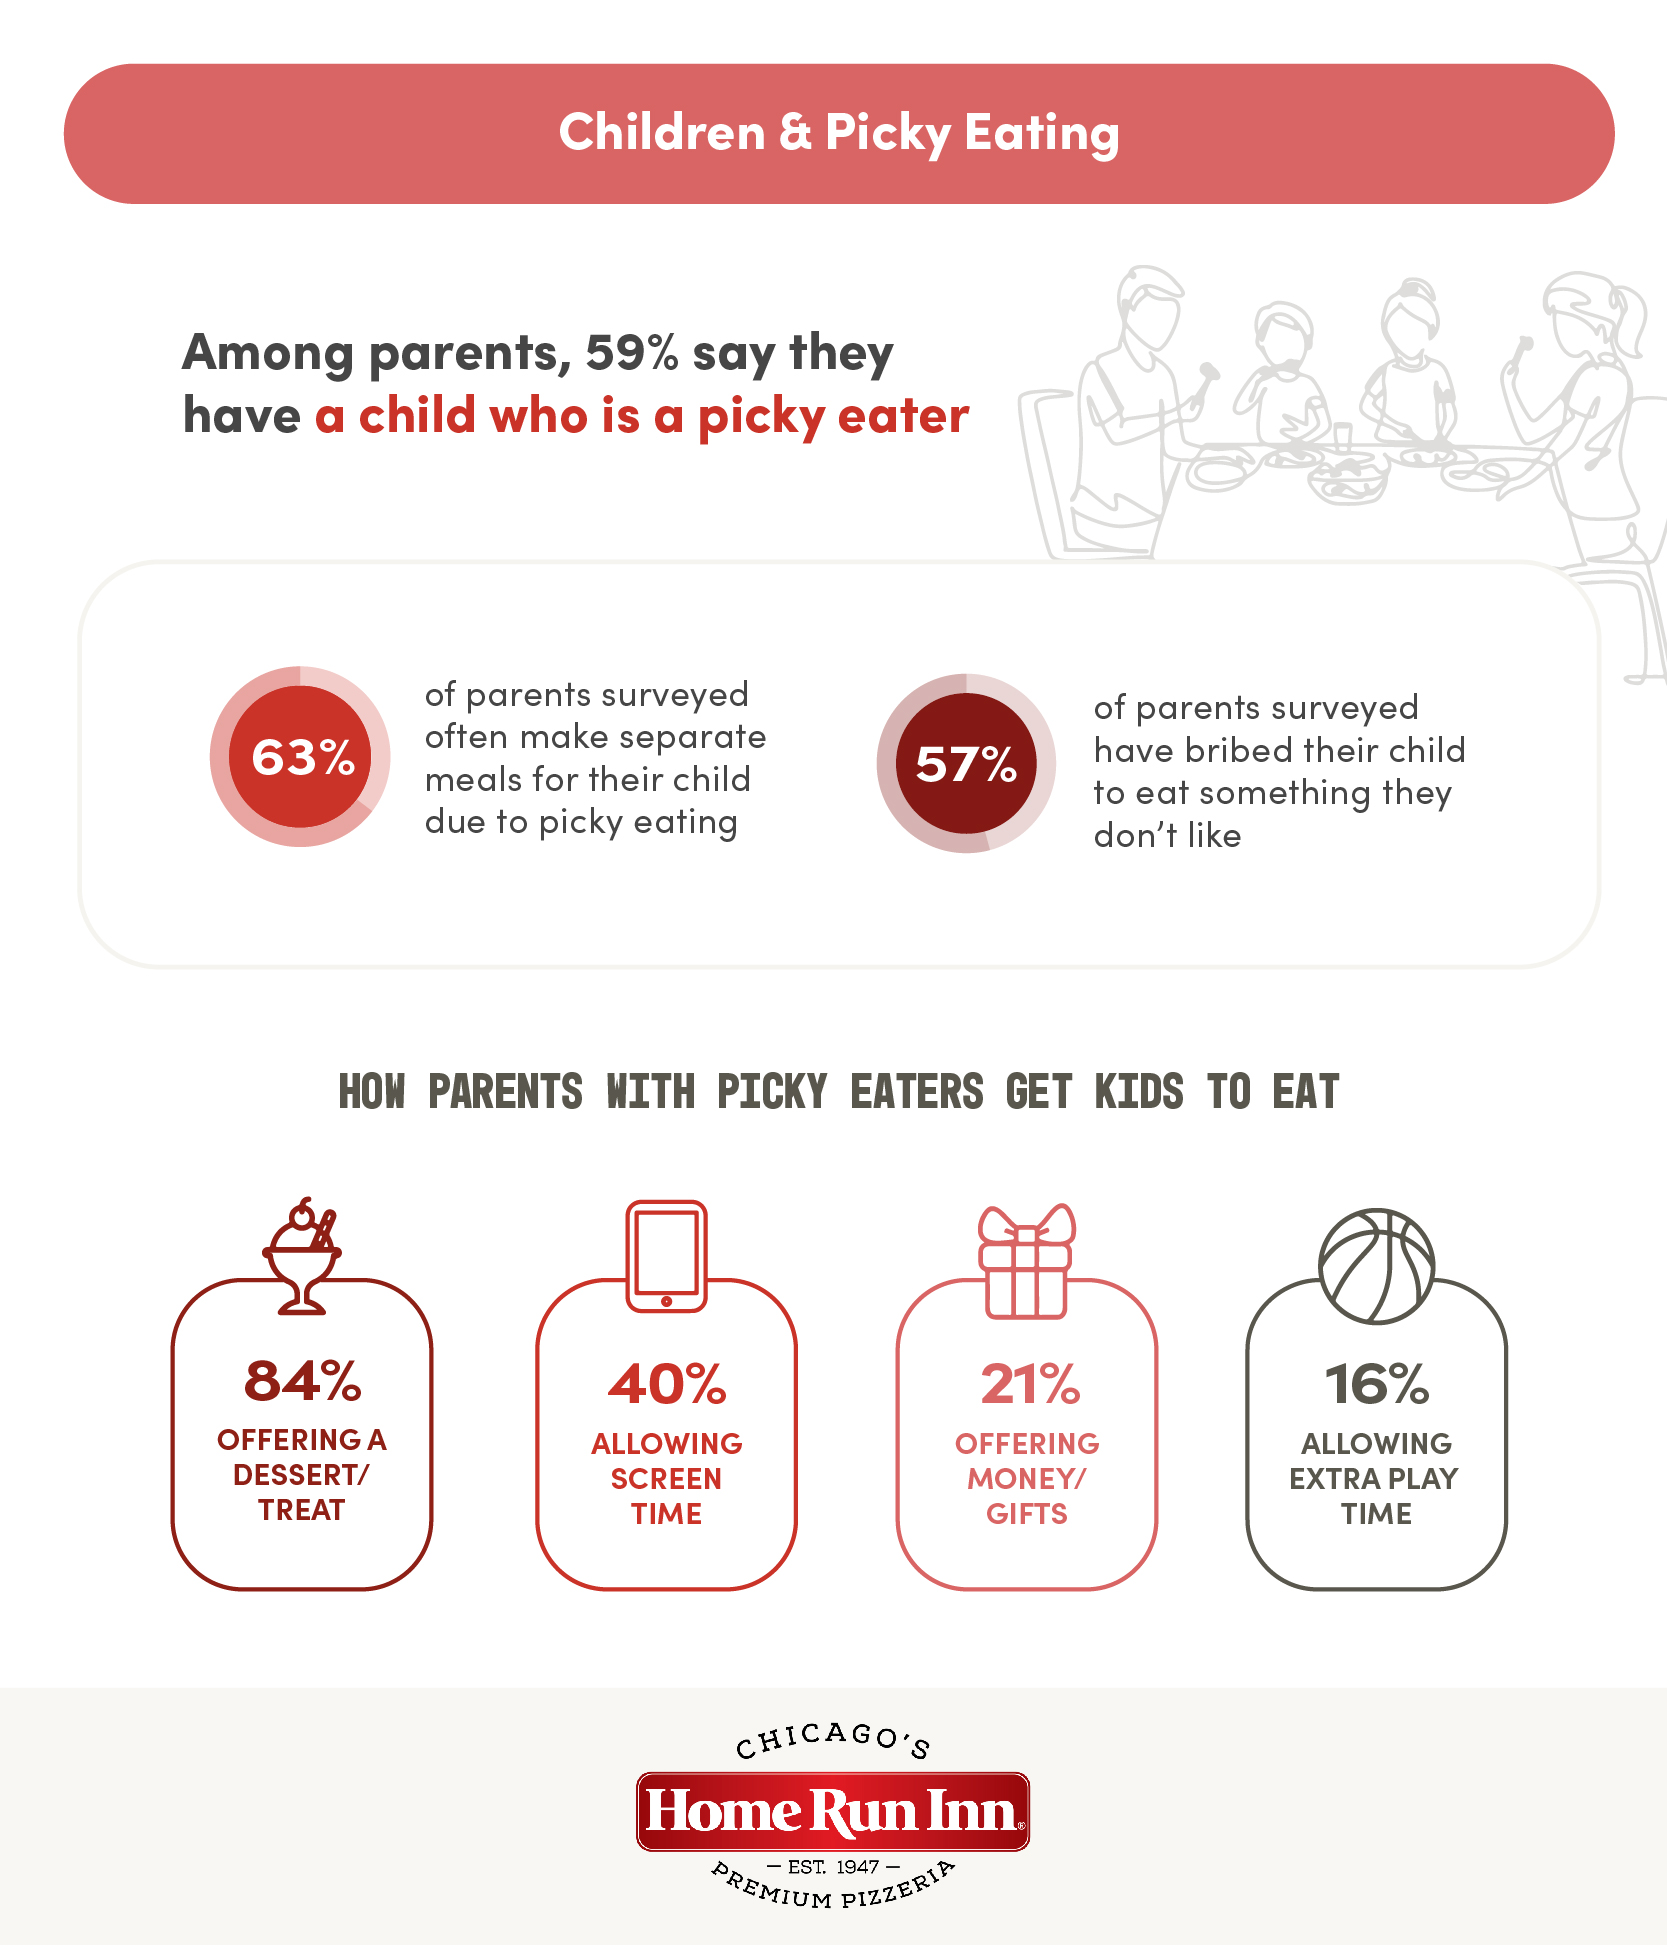 among paretns 59% say they have a picky eater, How parents deal with icky eaters: give them treat or dessert, allow screen time, offer money or gifts or allowextra play time